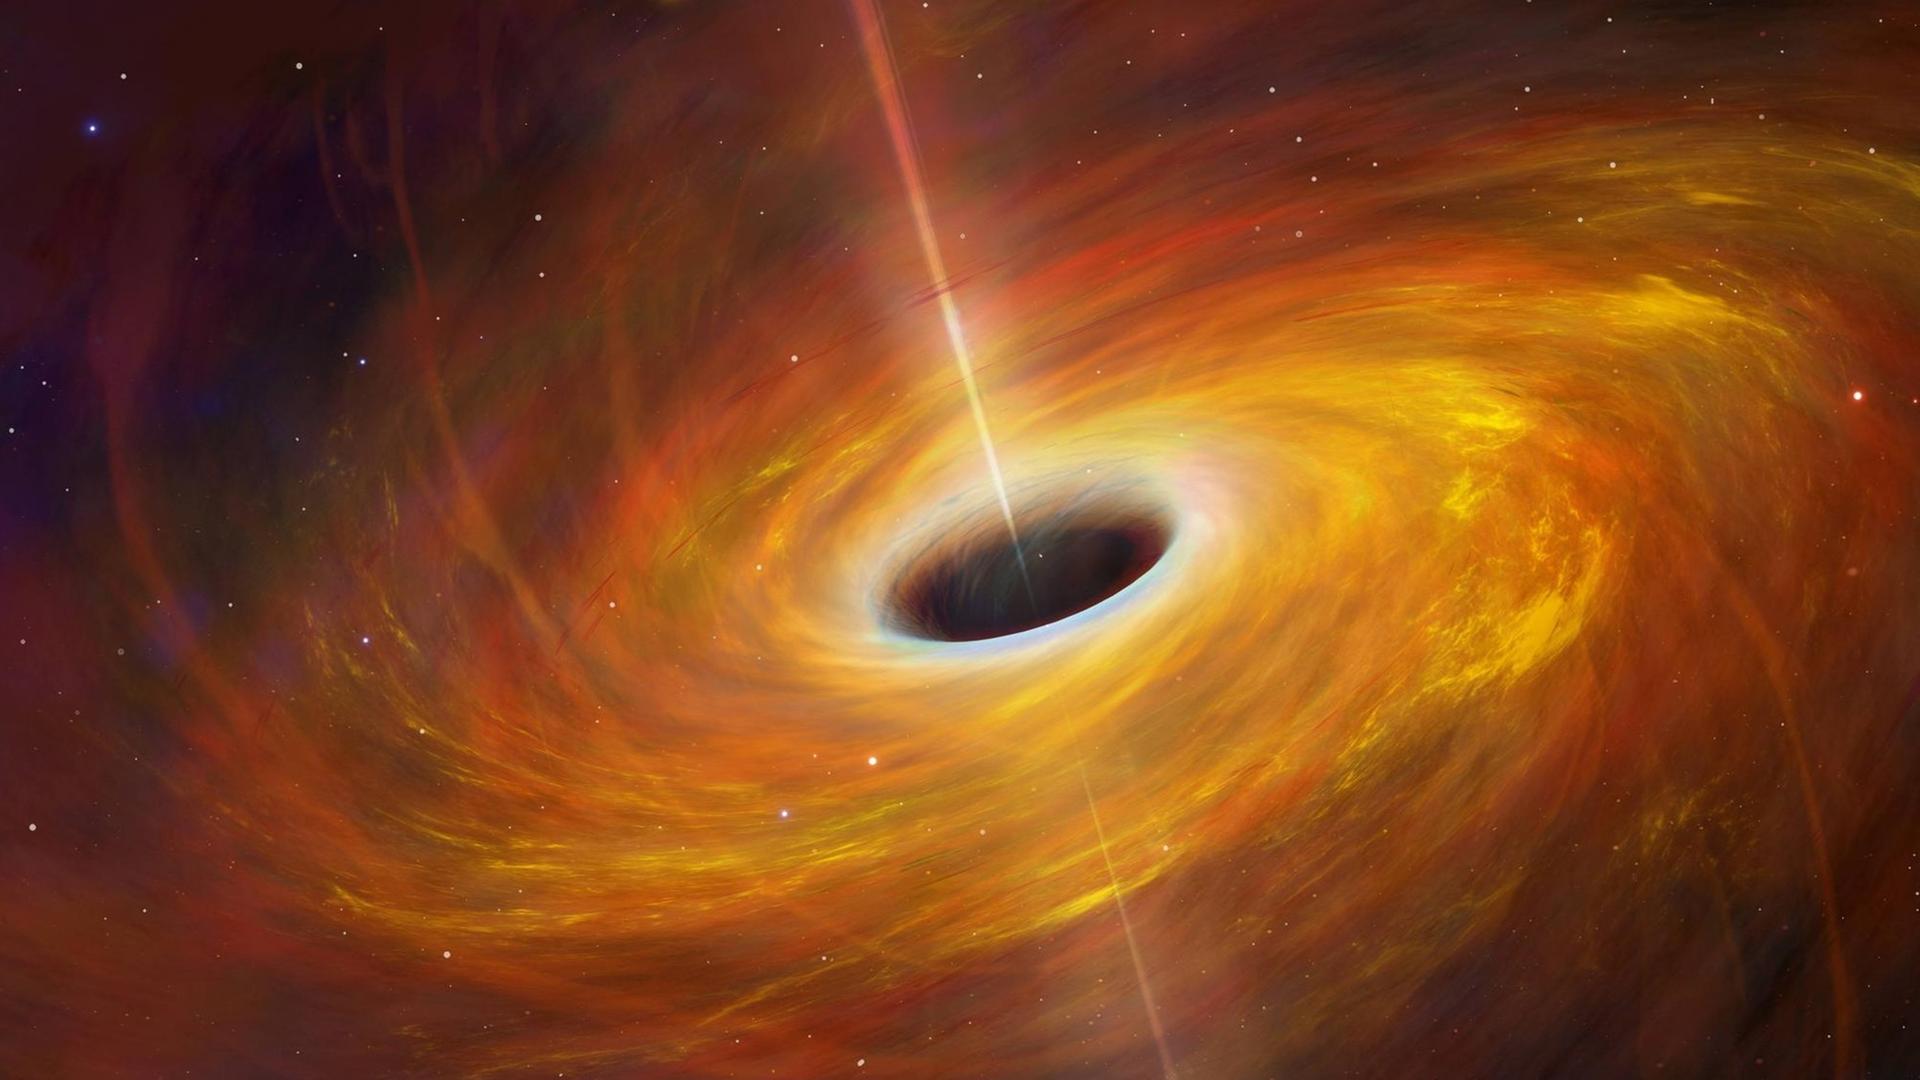 Space: Researchers discover a giant black hole in a distant galaxy